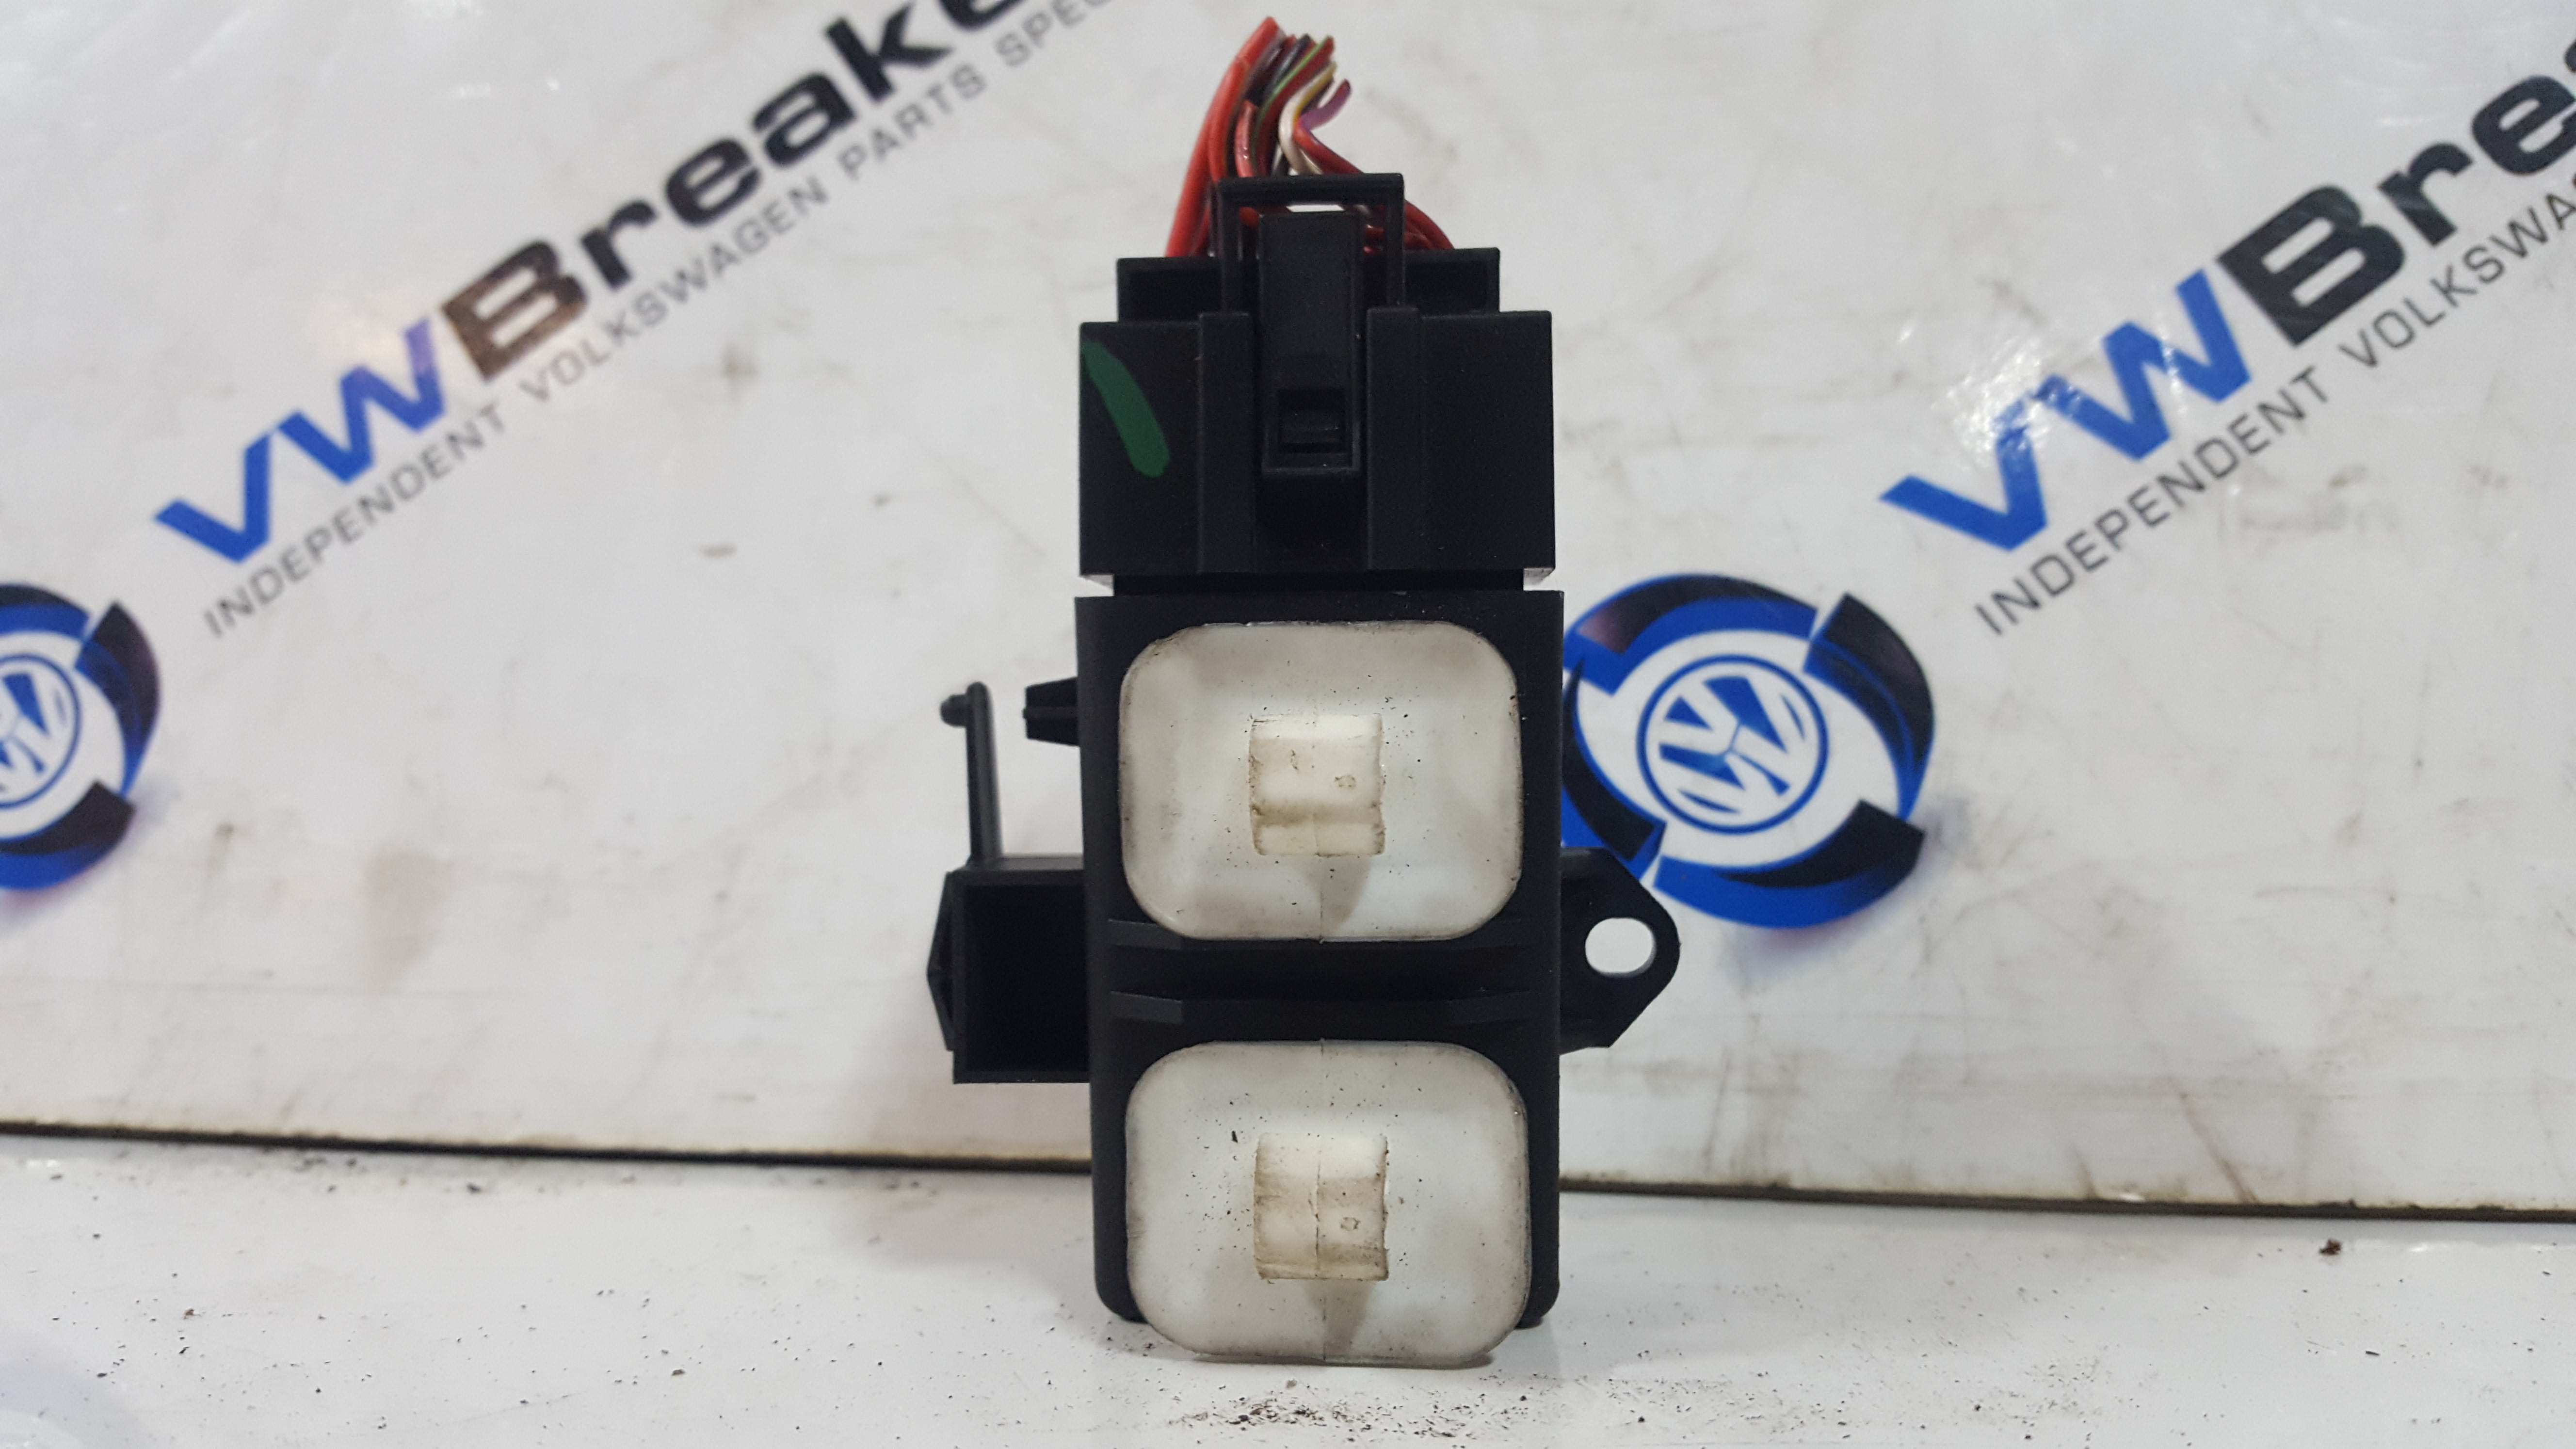 Volkswagen Polo 6R 2009-2014 Heated Seat Module 6R0959772a